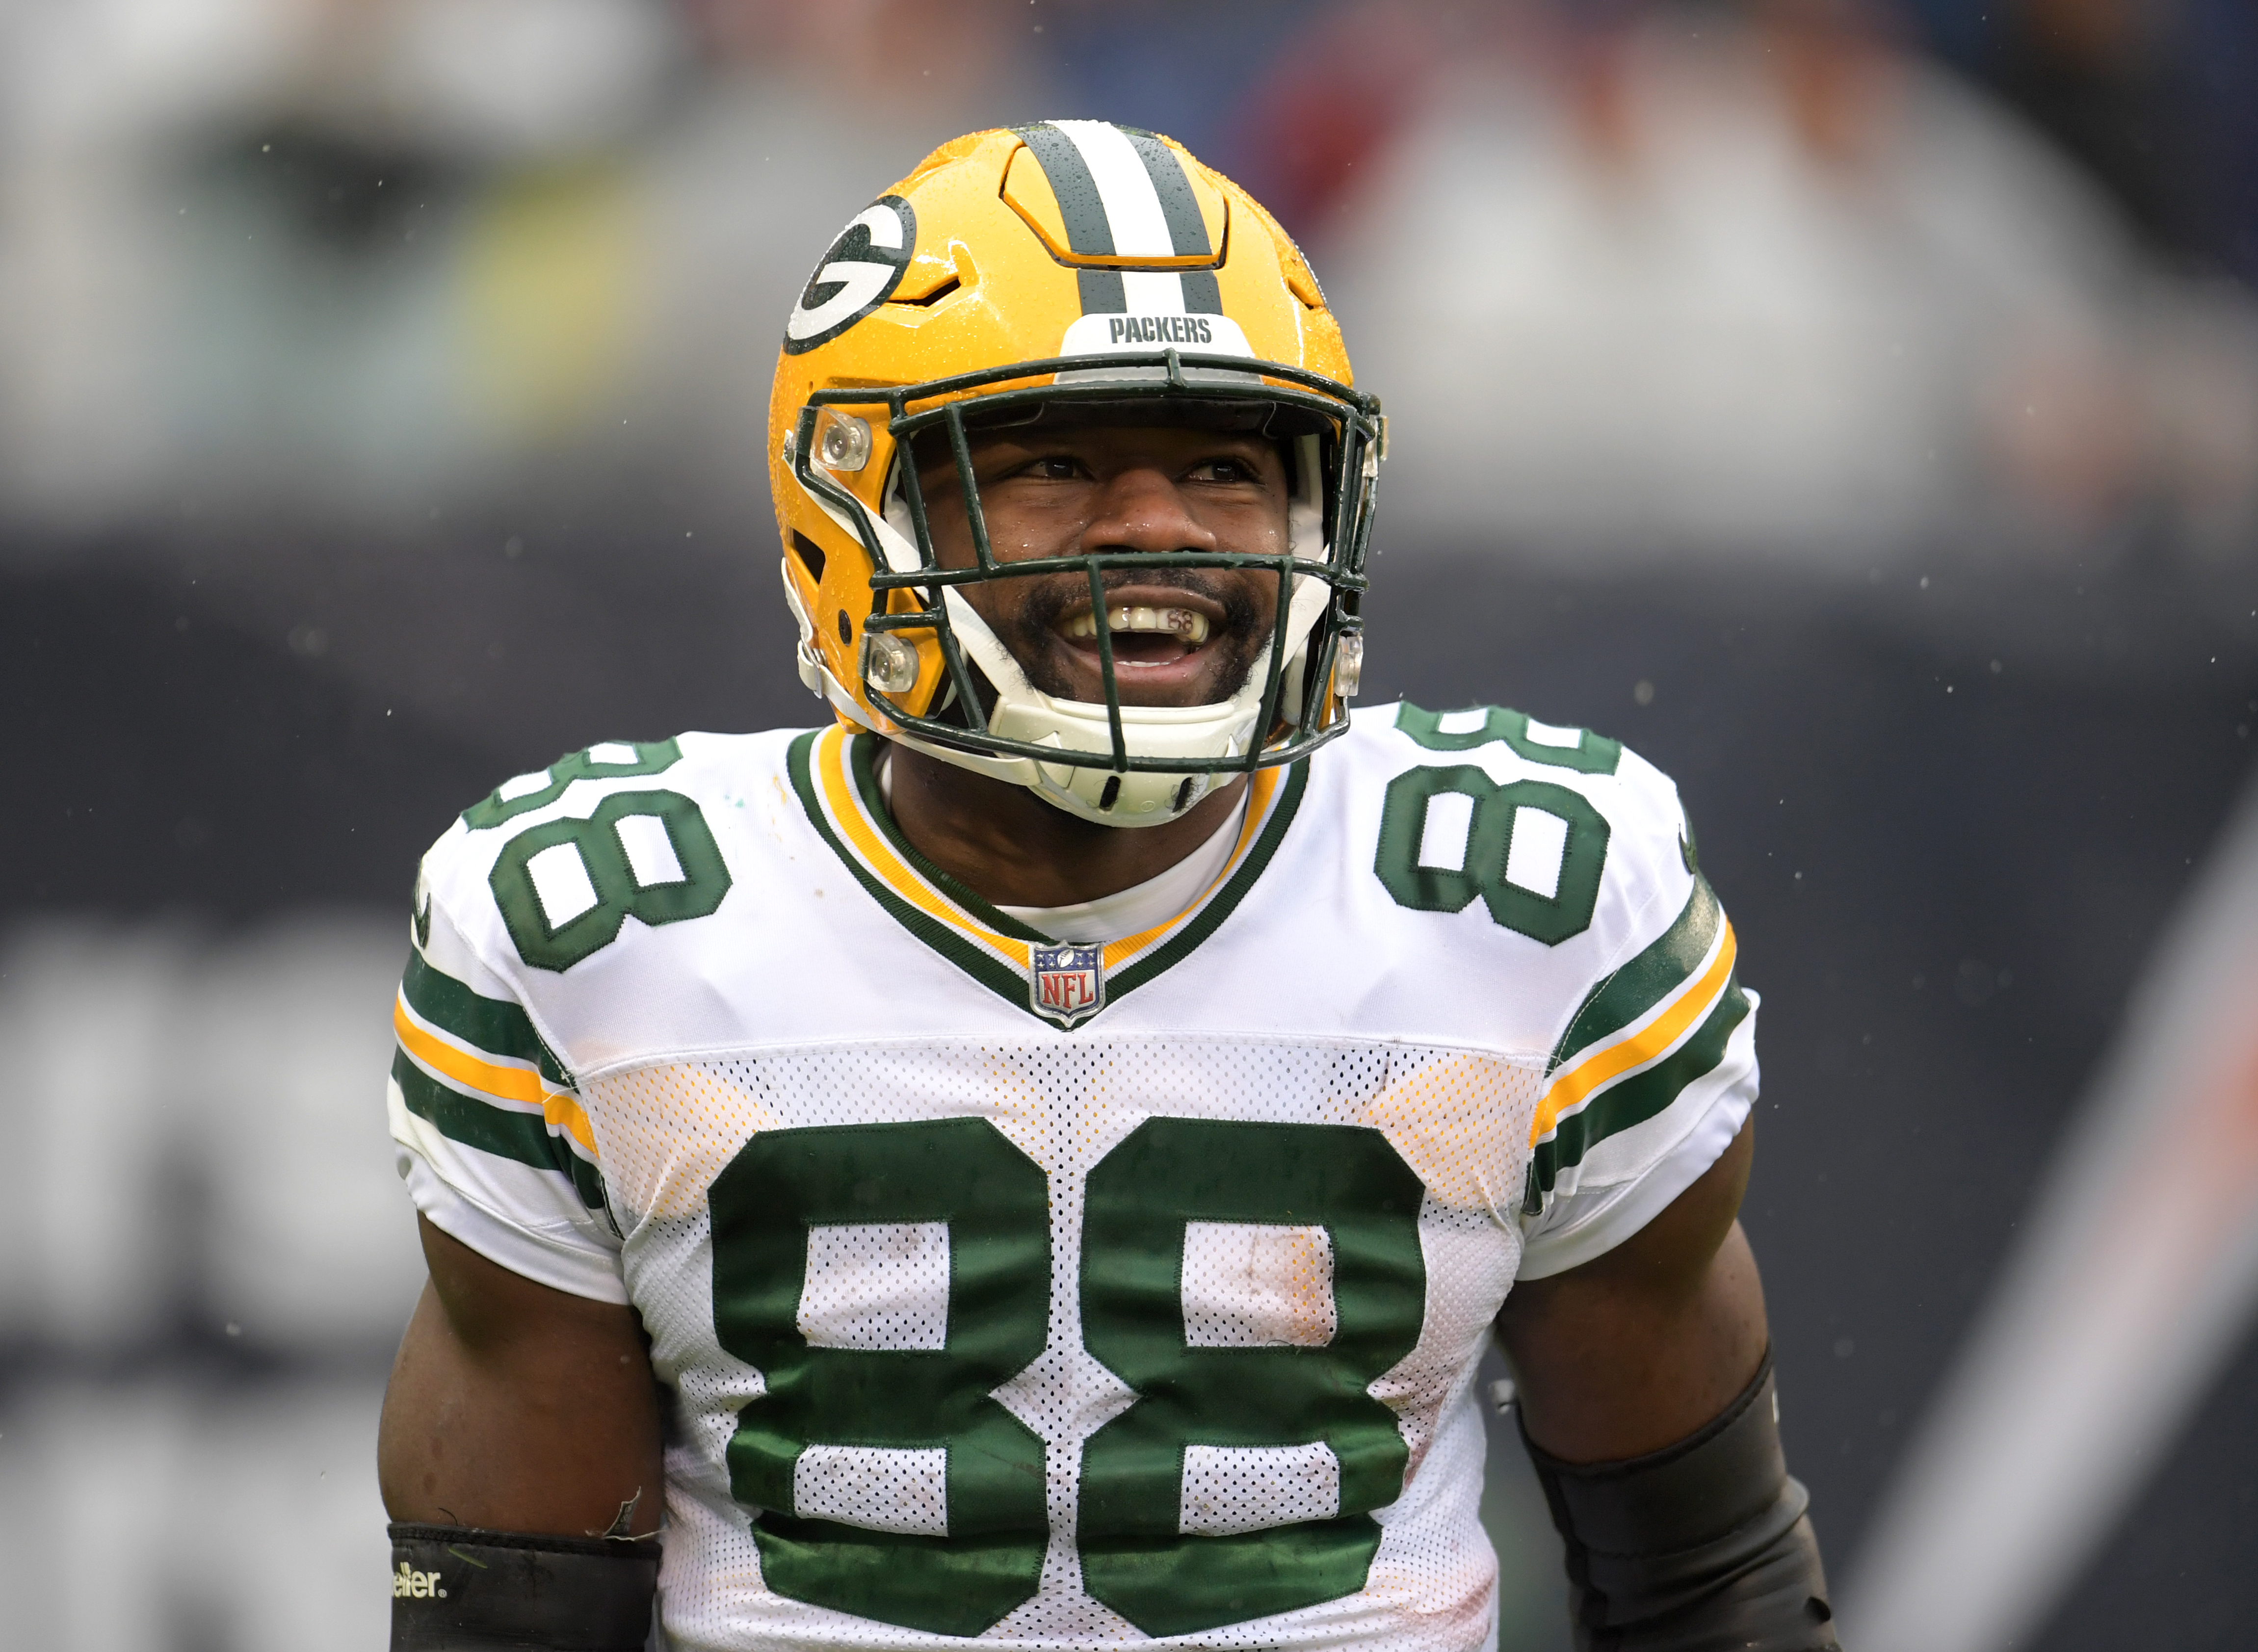 Packers wide receiver void can be filled within the organization